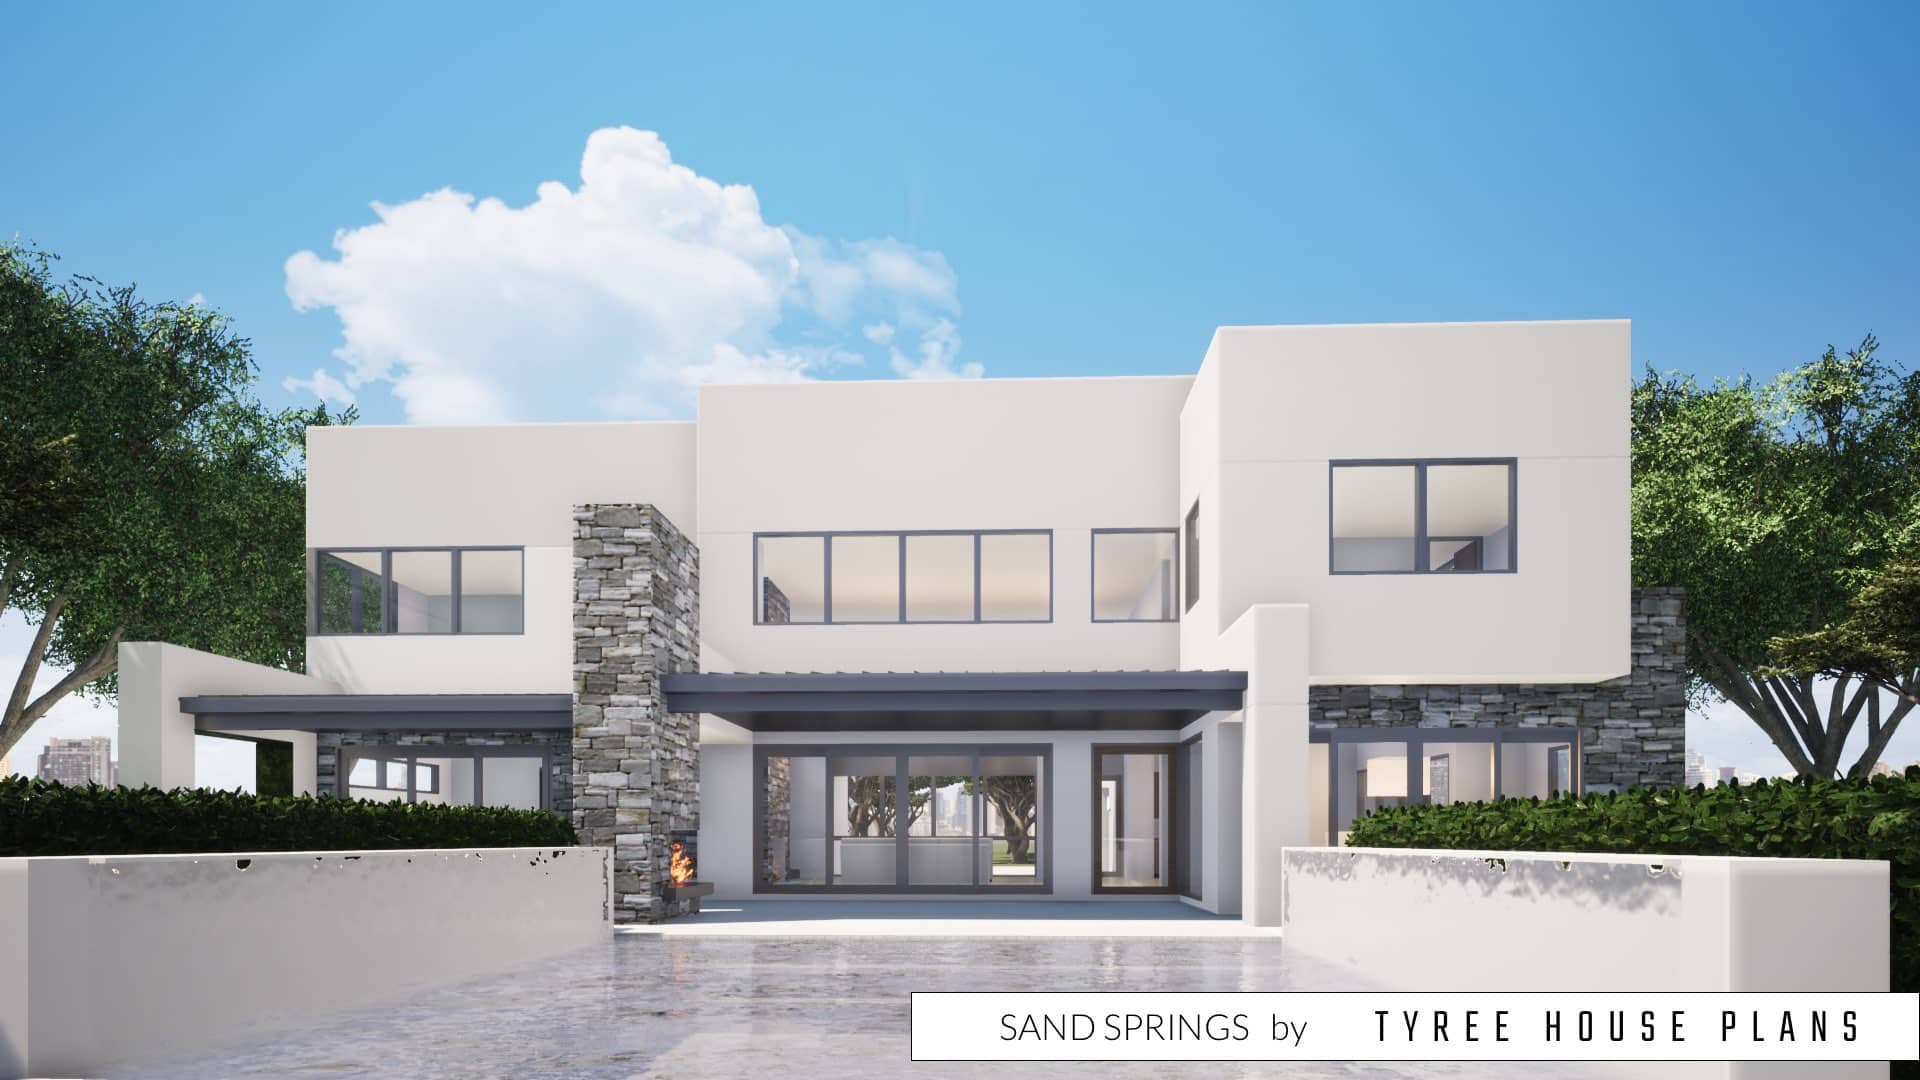 Rear view. Sand Springs by Tyree House Plans.